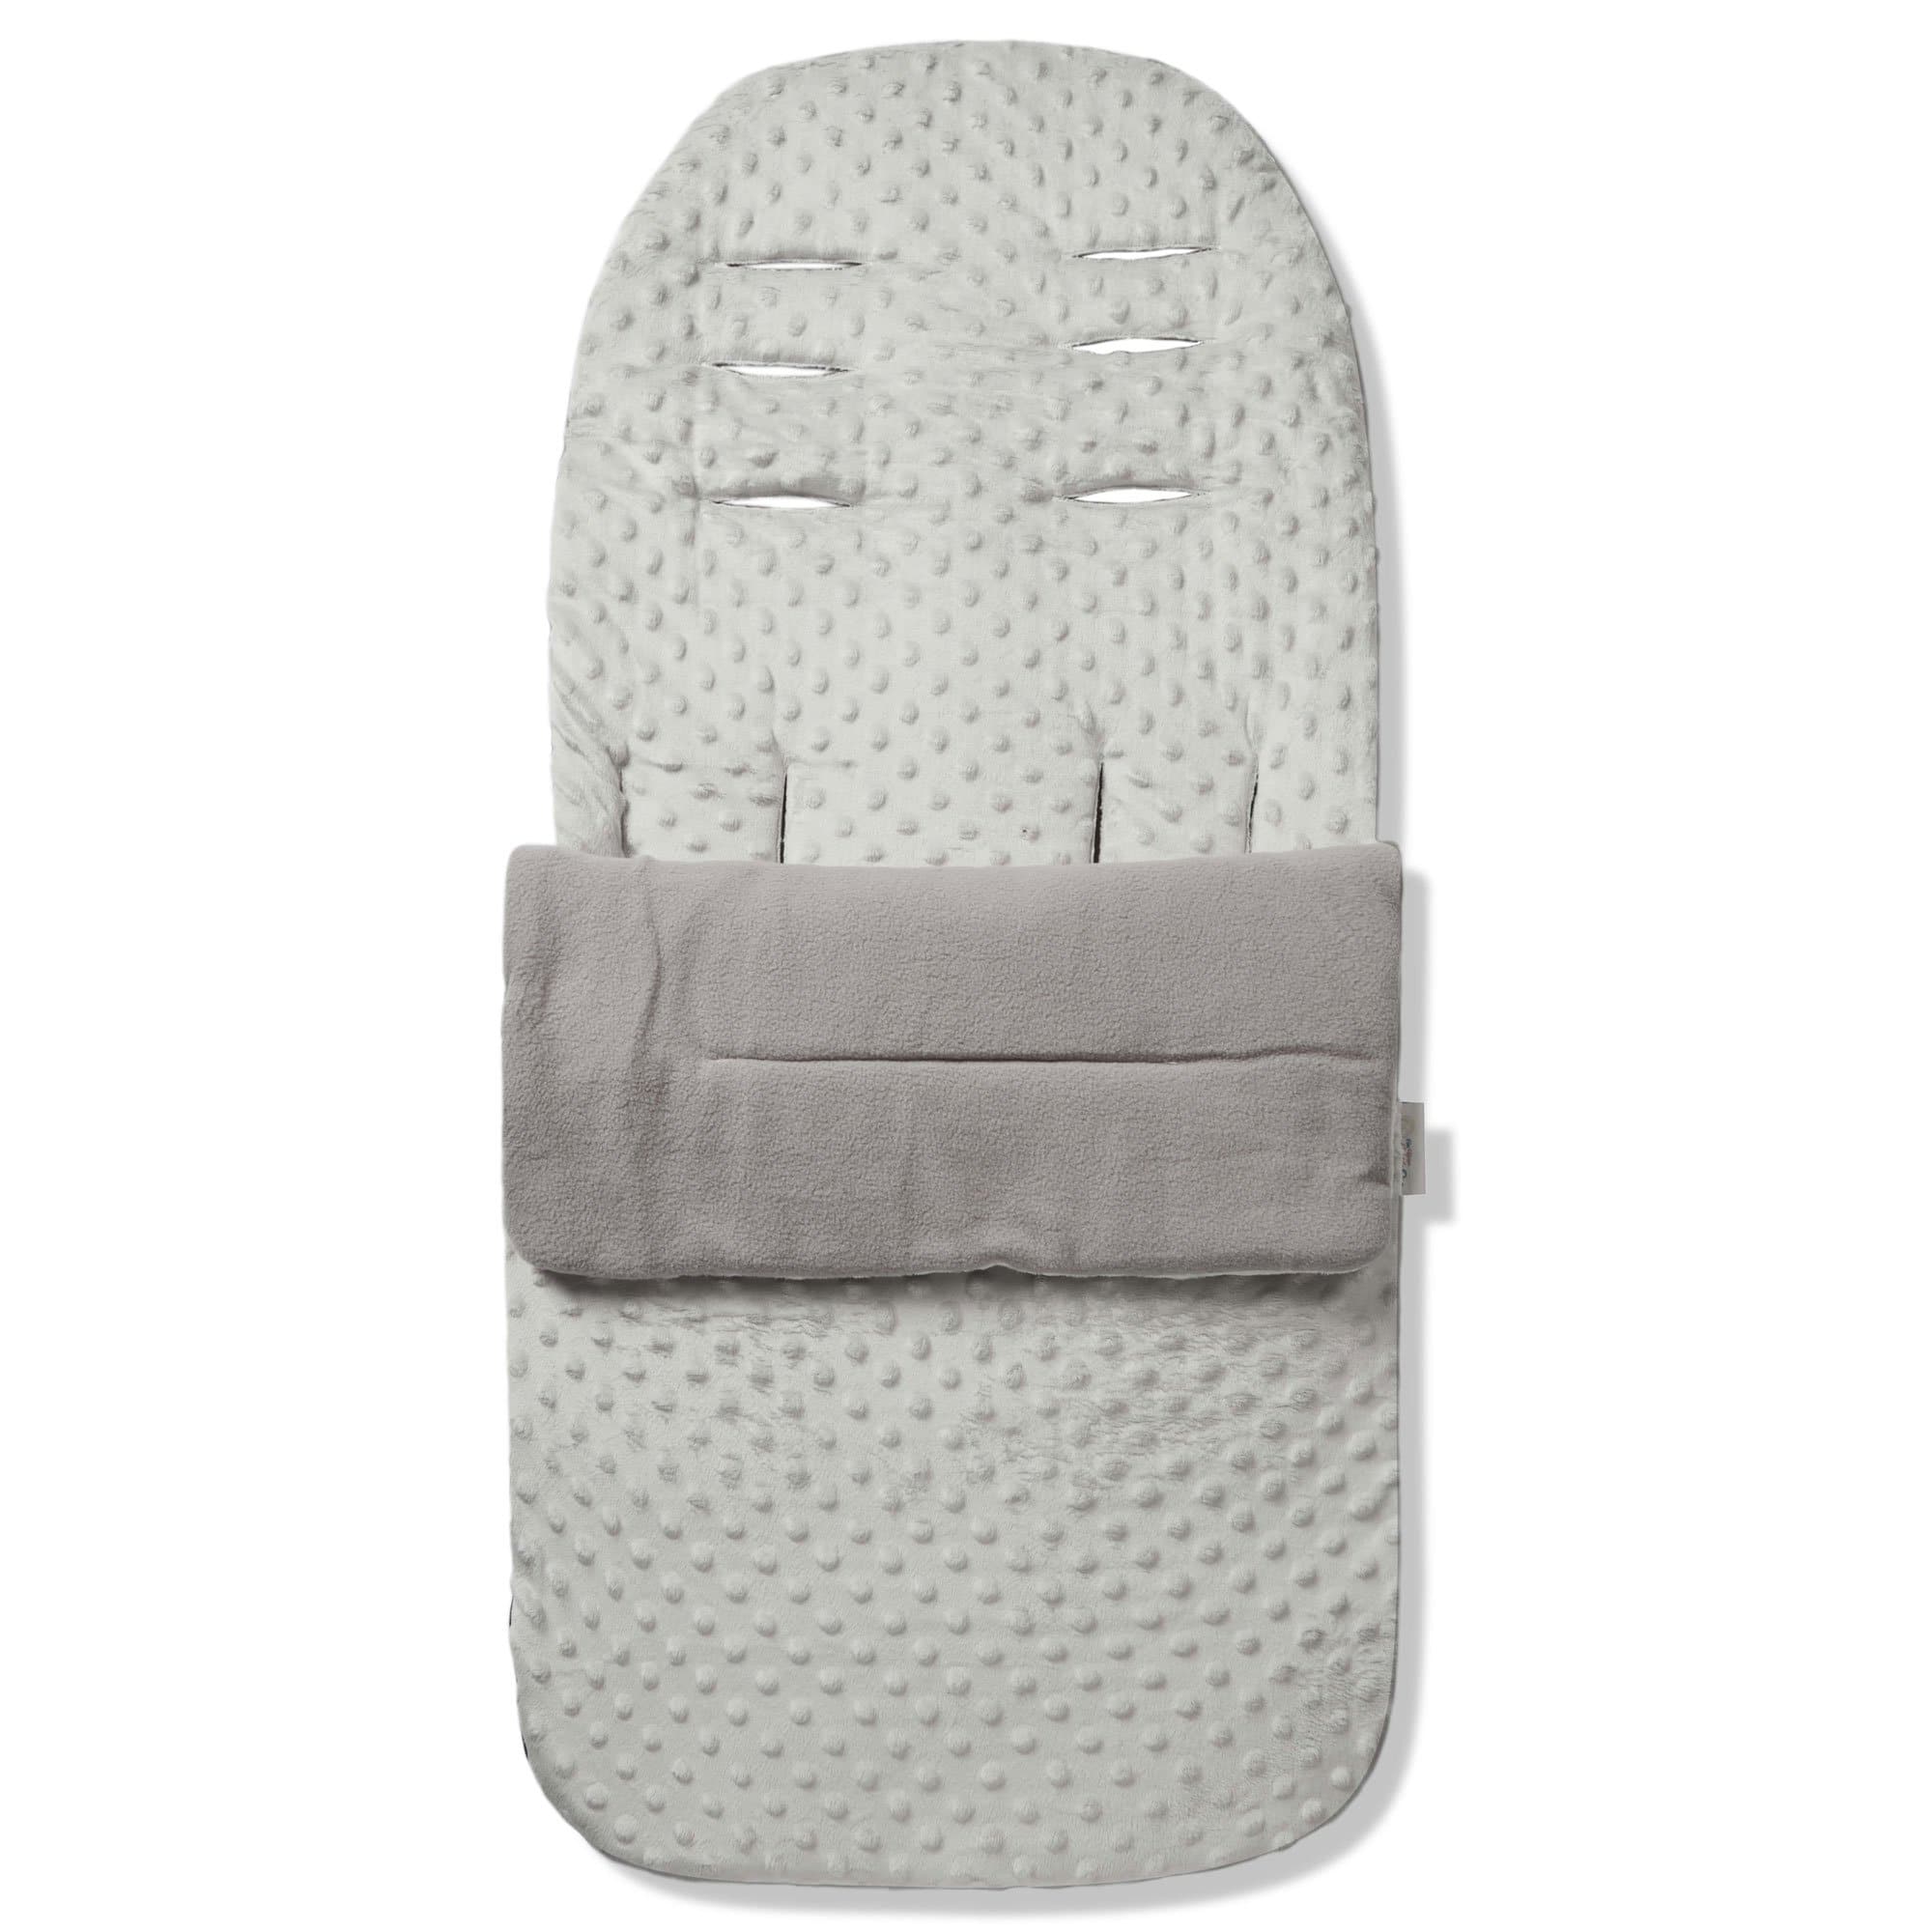 Dimple Footmuff / Cosy Toes Compatible with TFK - Grey / Fits All Models | For Your Little One